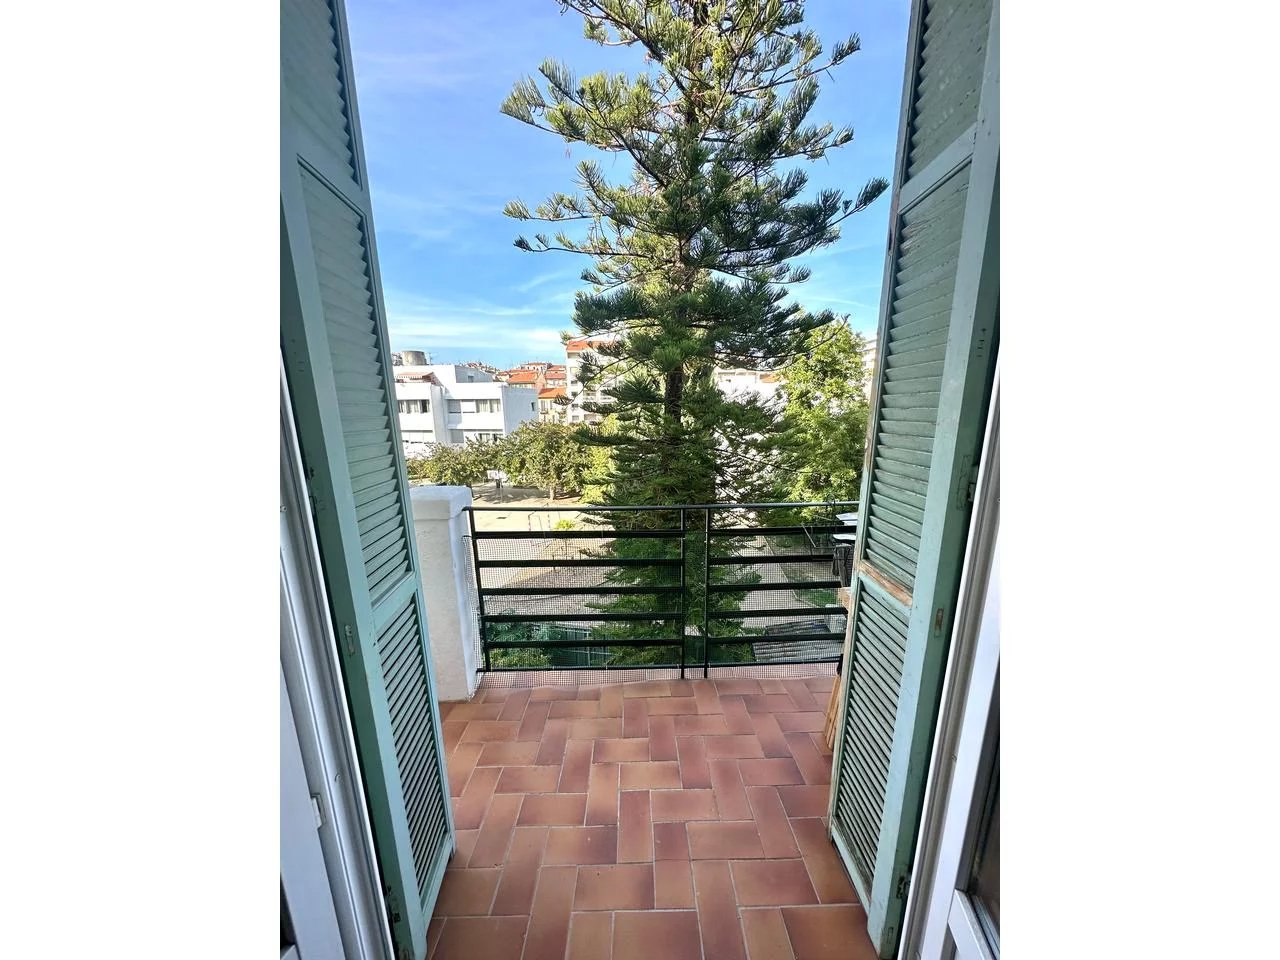 Appartement  2 Rooms 57m2  for sale   298 000 €